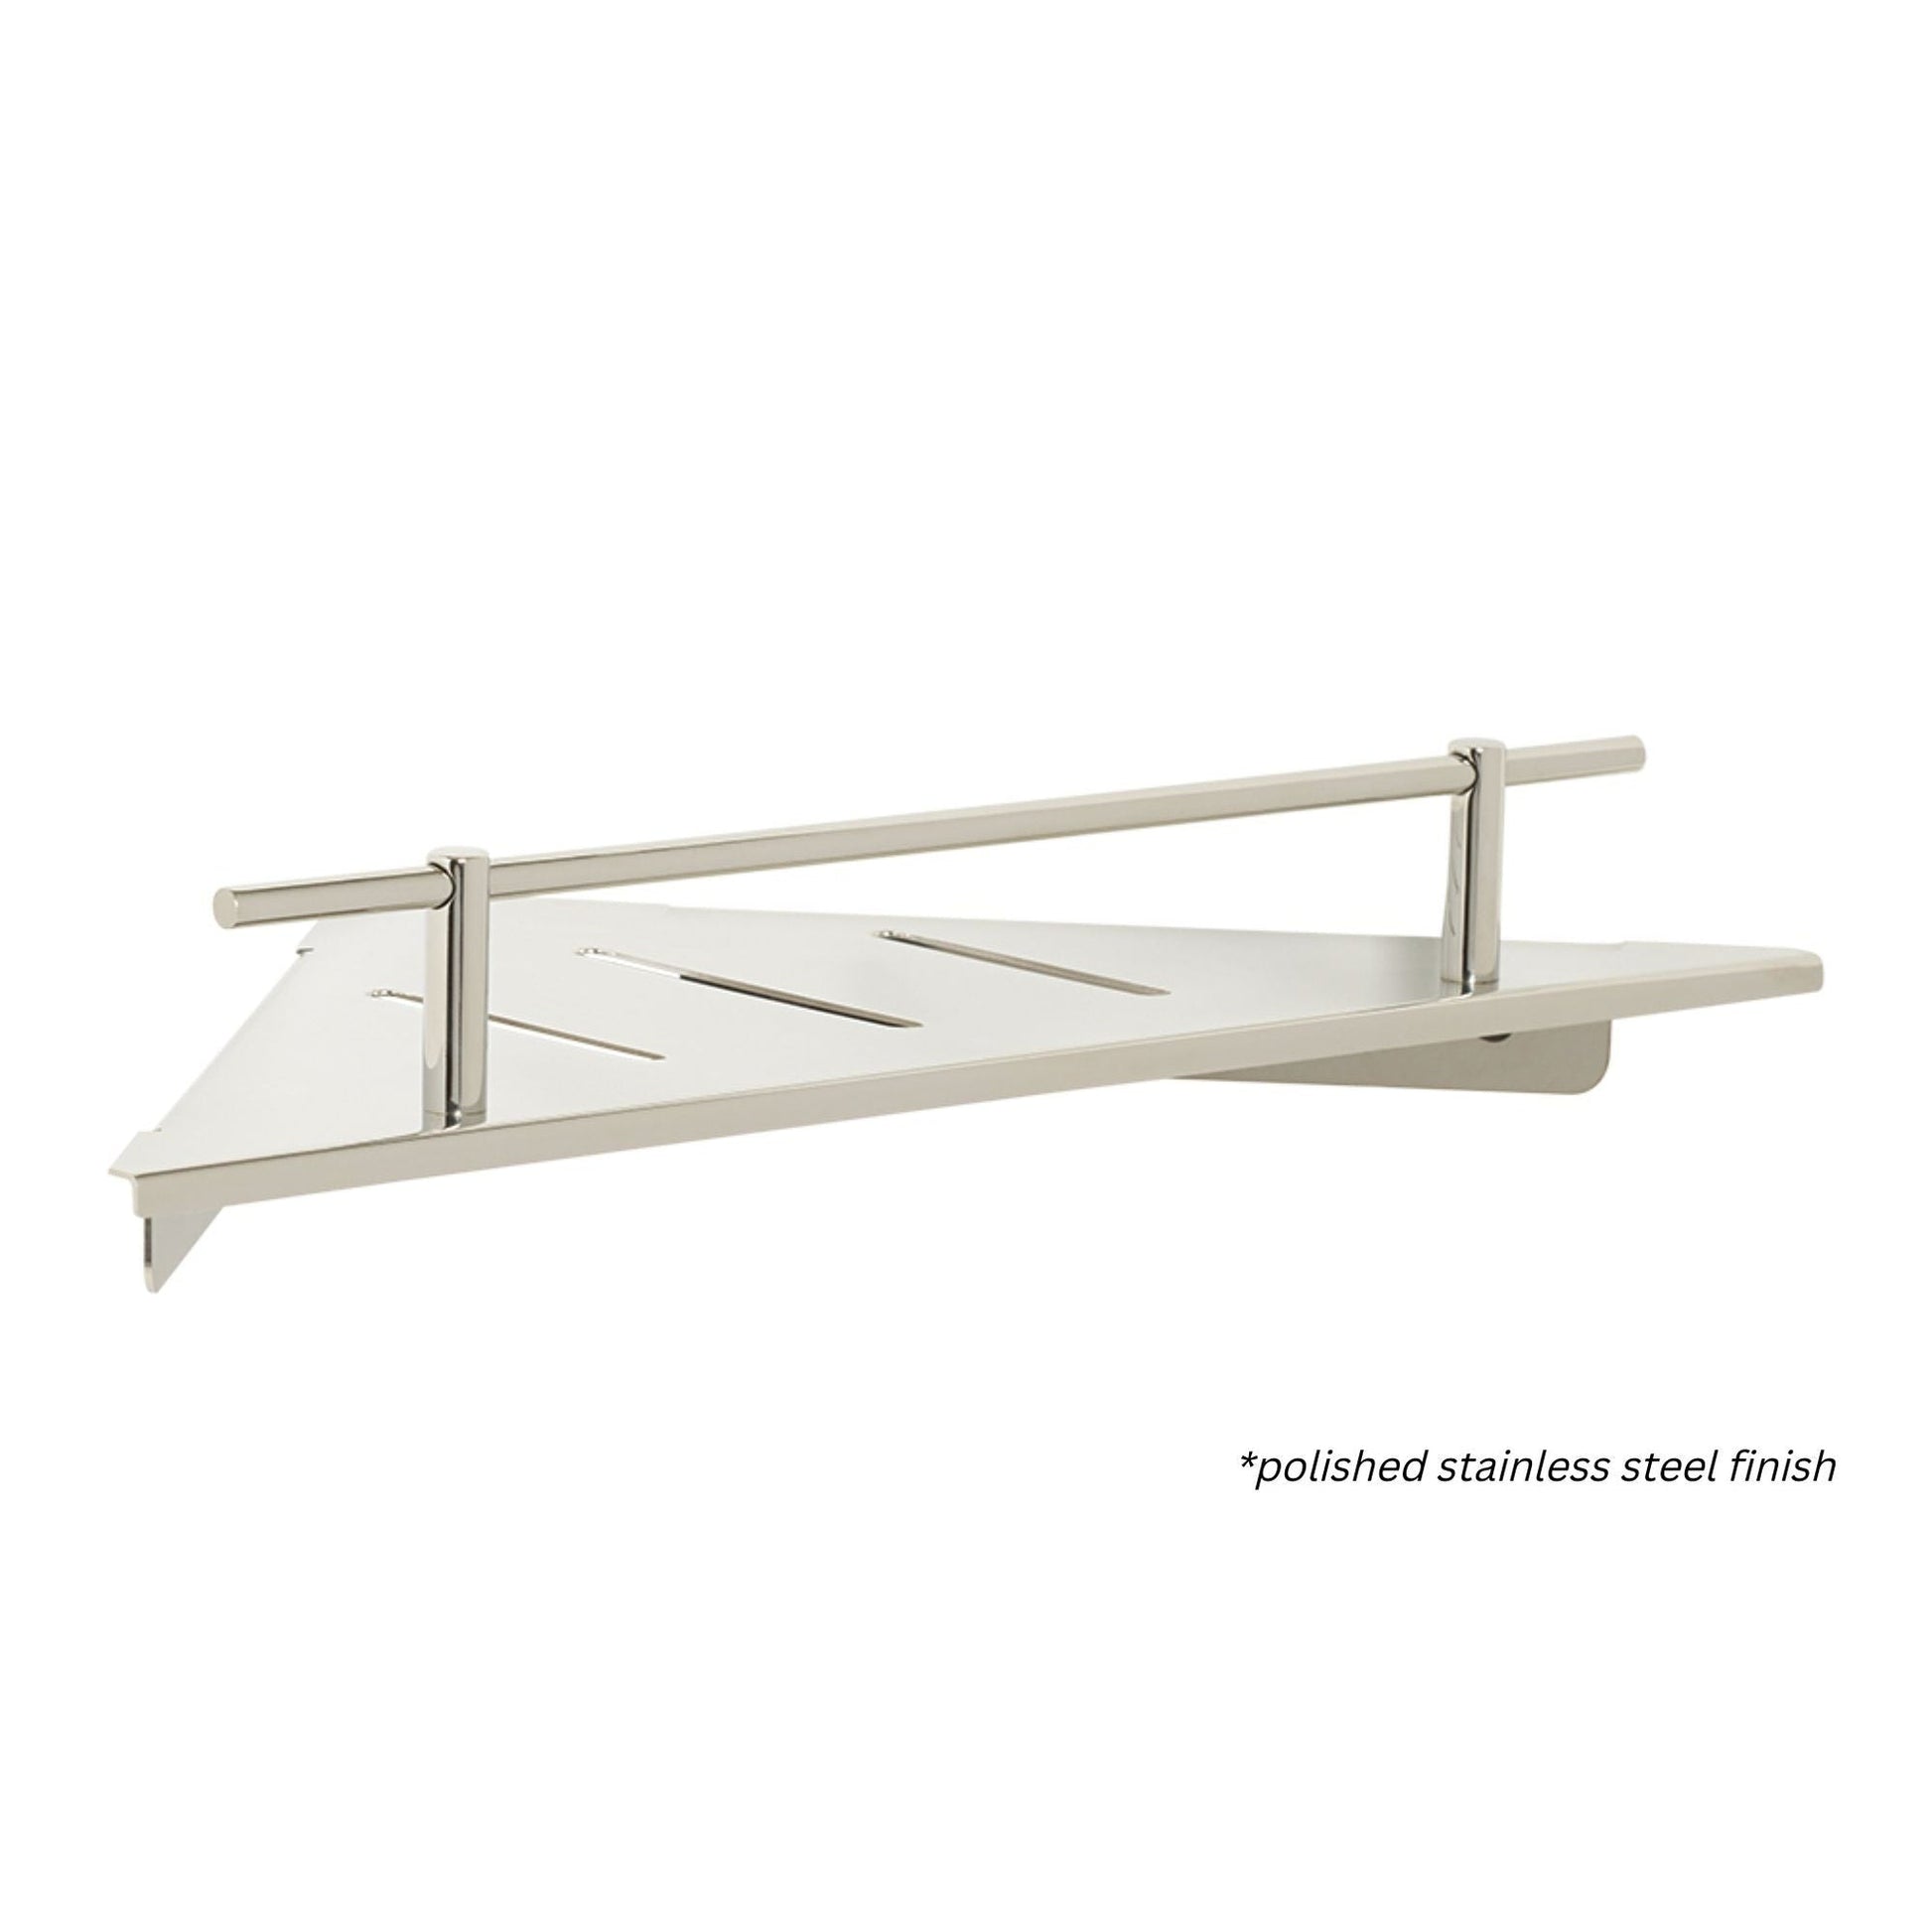 https://usbathstore.com/cdn/shop/products/Seachrome-Lifestyle-and-Wellness-Series-Corner-Shower-Shelf-With-Drain-Slots-and-Rail-in-White-Powder-Coated-Stainless-Finish.jpg?v=1663519242&width=1946